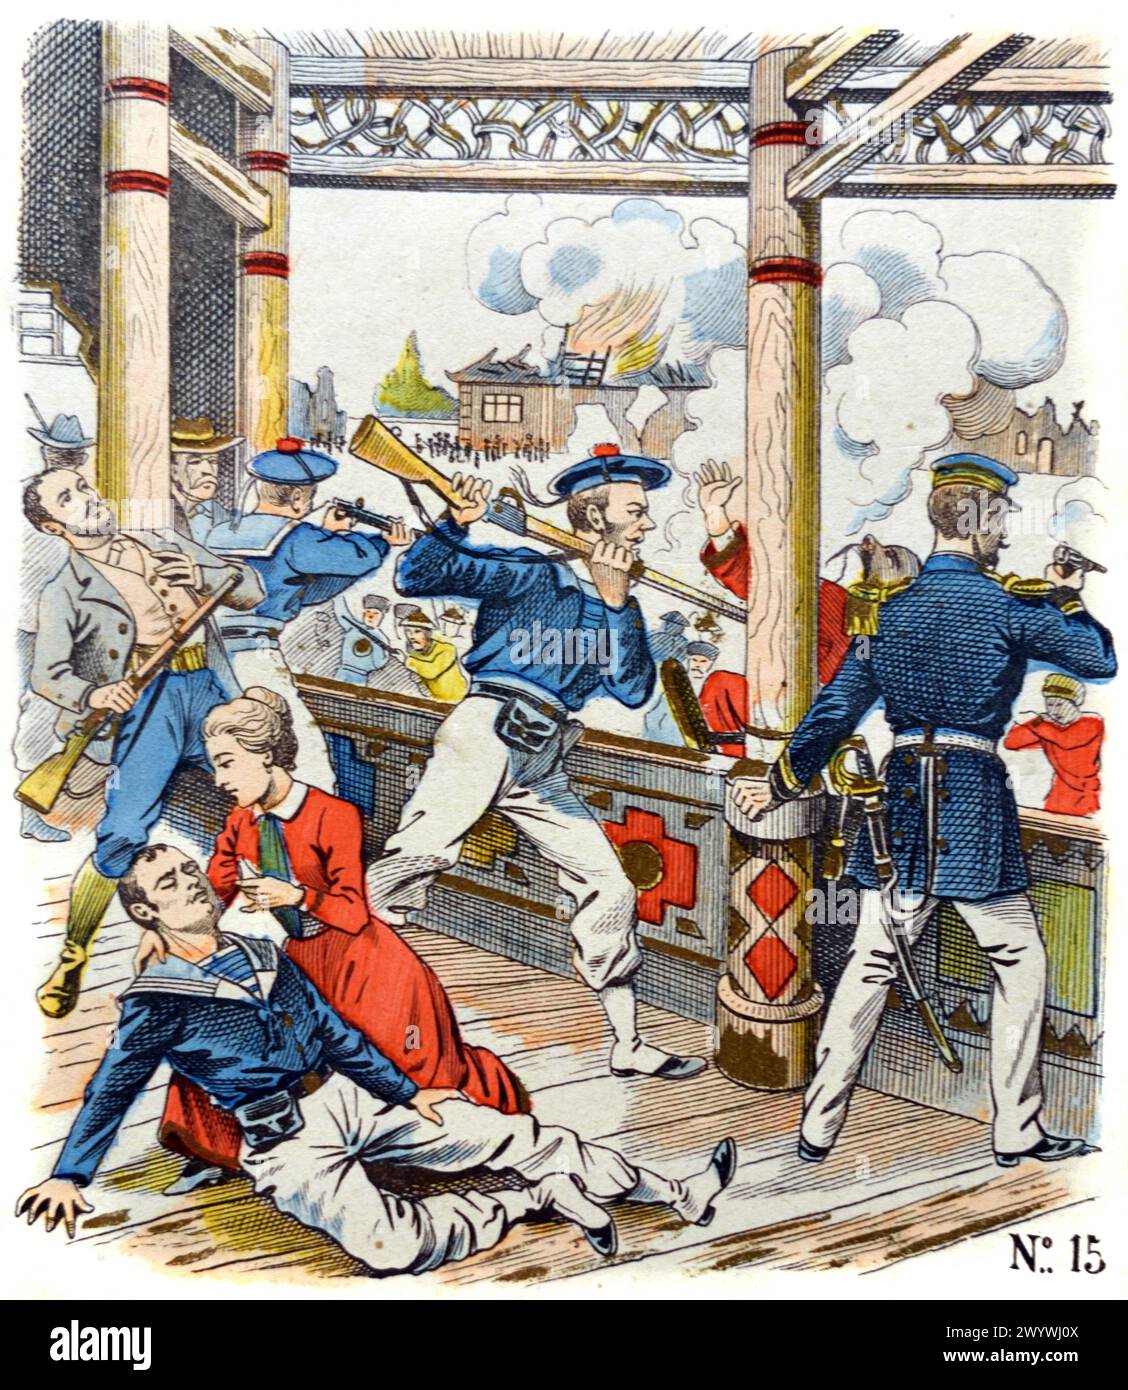 European or French Soldiers Defend Themselves Aainst a Chinese Attack during the Boxer Rebellion aka the Boxer Uprising, Boxer Insurrection, Boxer Movement, Boxer Insurrection or Yihetuan Movement Peking China (1899-1901). Vintage or Historic Coloured Engraving or Illustration, early c20th. Stock Photo